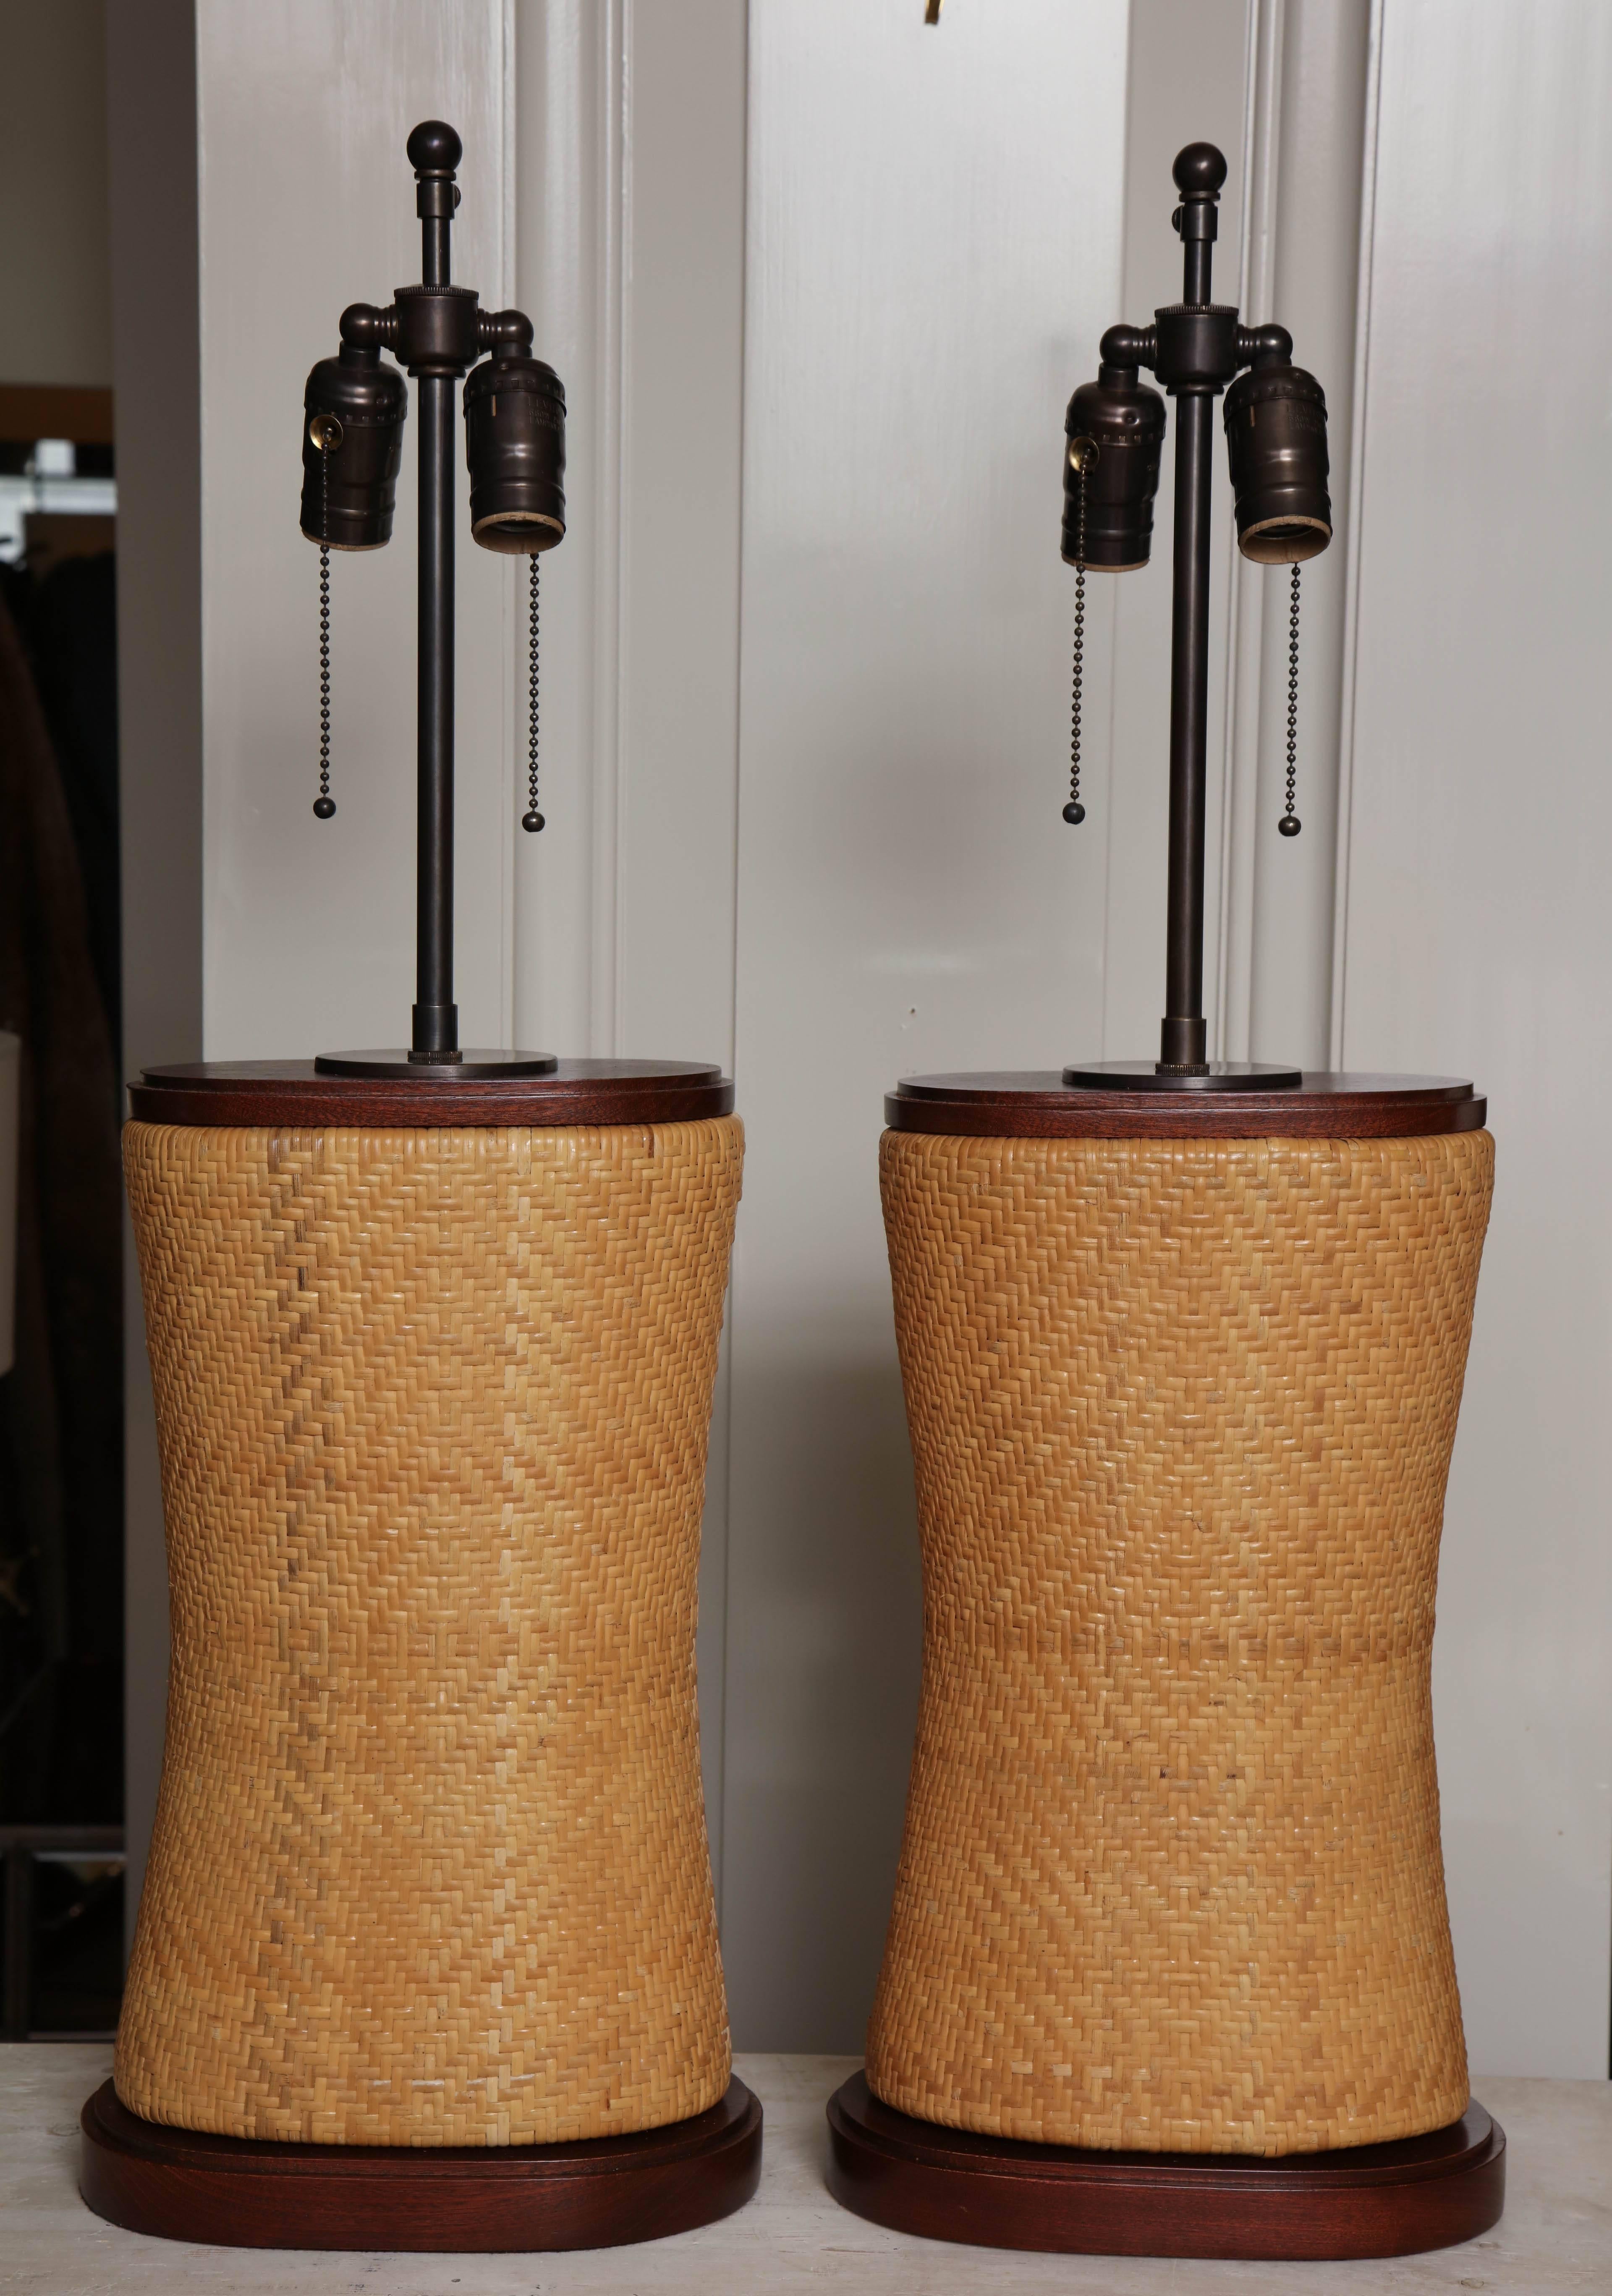 Pair of Japanese neck pillows, circa 1950 mounted as lamps with custom mahogany stepped bases and bronze finished brass hardware, ivory woven oval shades with rolled edges included but not shown here.